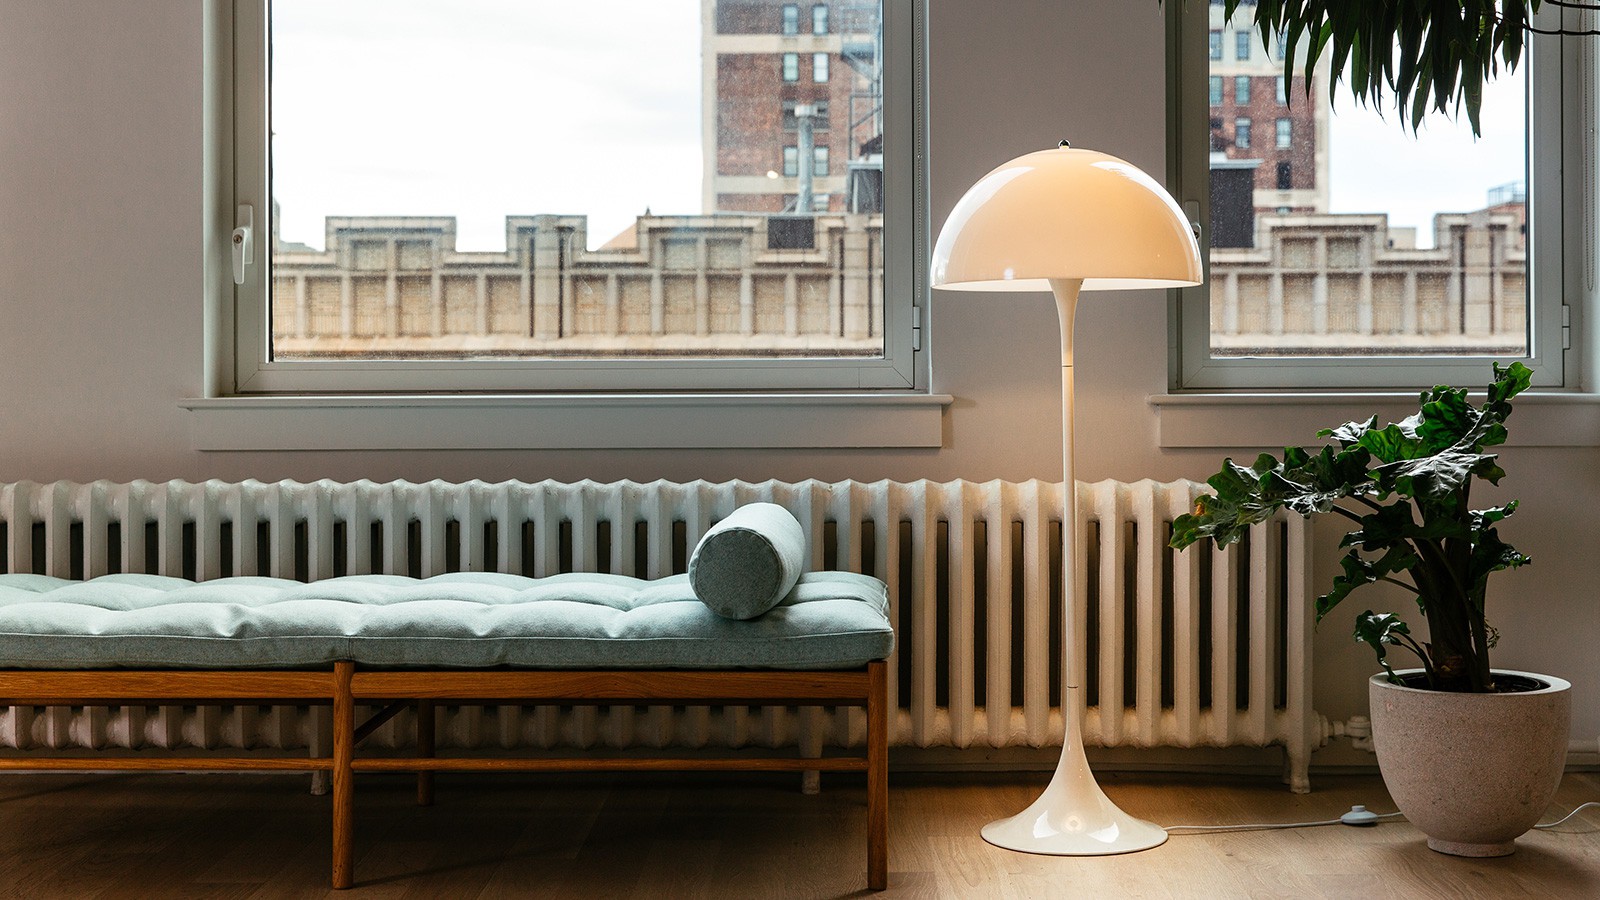 Browse through the different floor lamp options and find the one that best suits your needs.